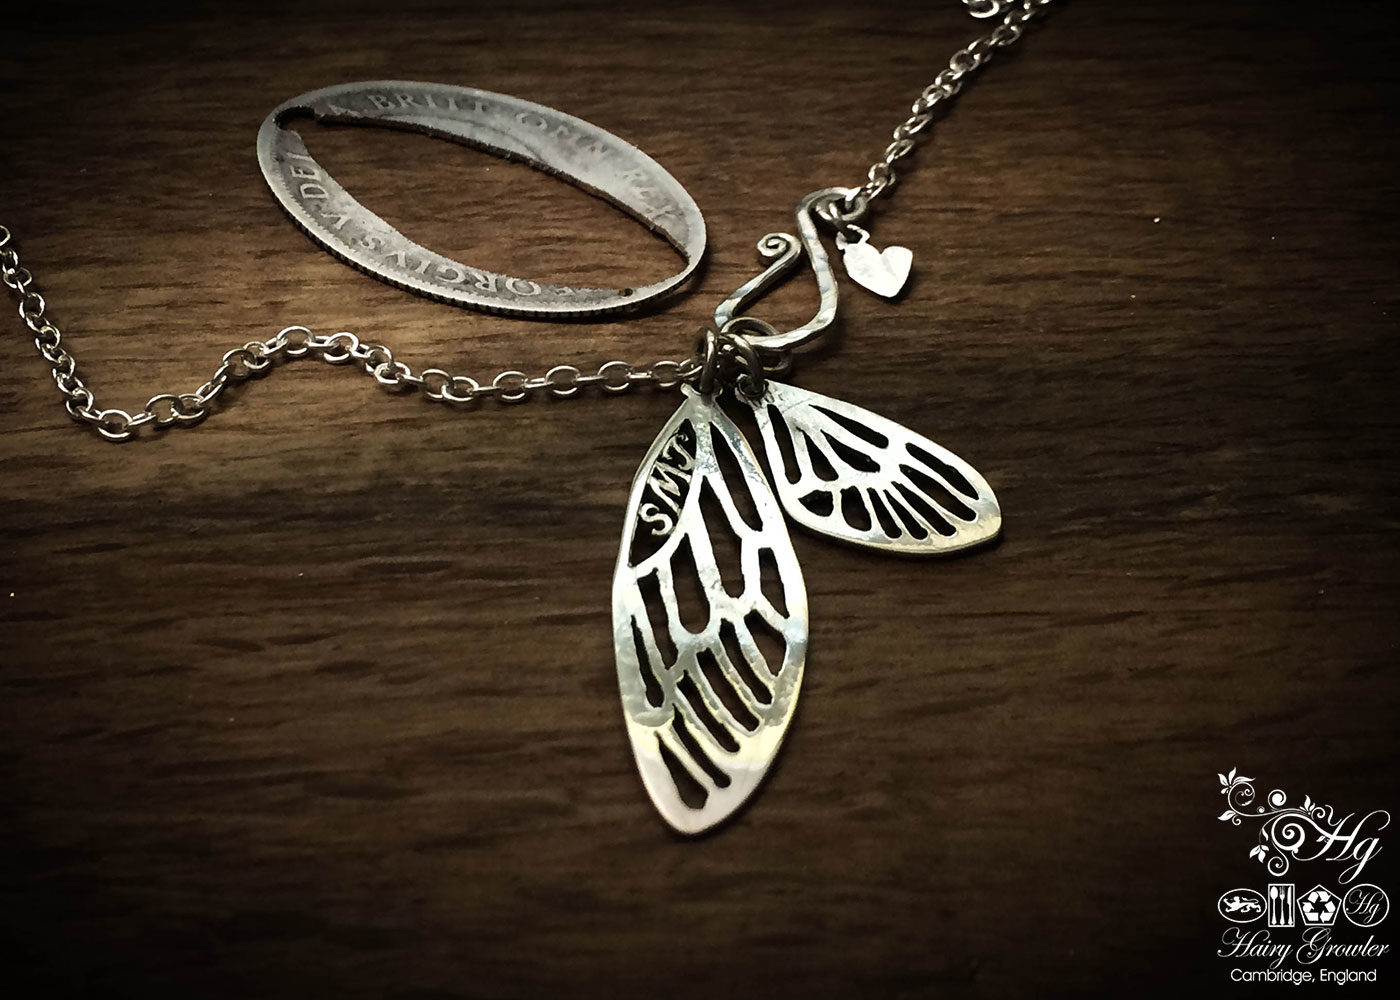 Handmade, recycled, sterling silver fairy faerie wings necklace being handmade